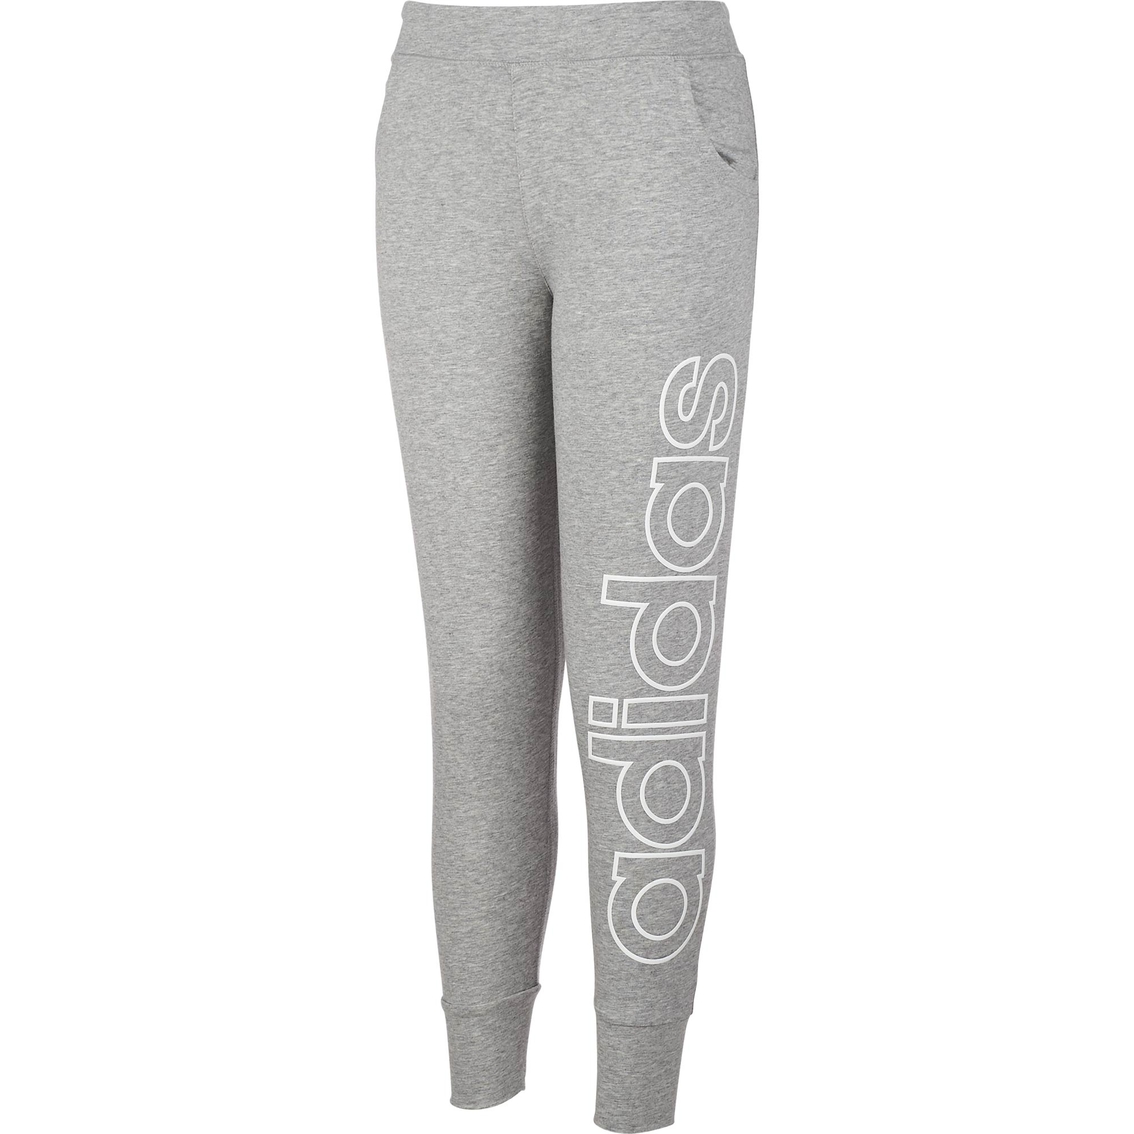 Adidas Girls Linear Joggers | Girls 7-16 | Clothing & Accessories ...